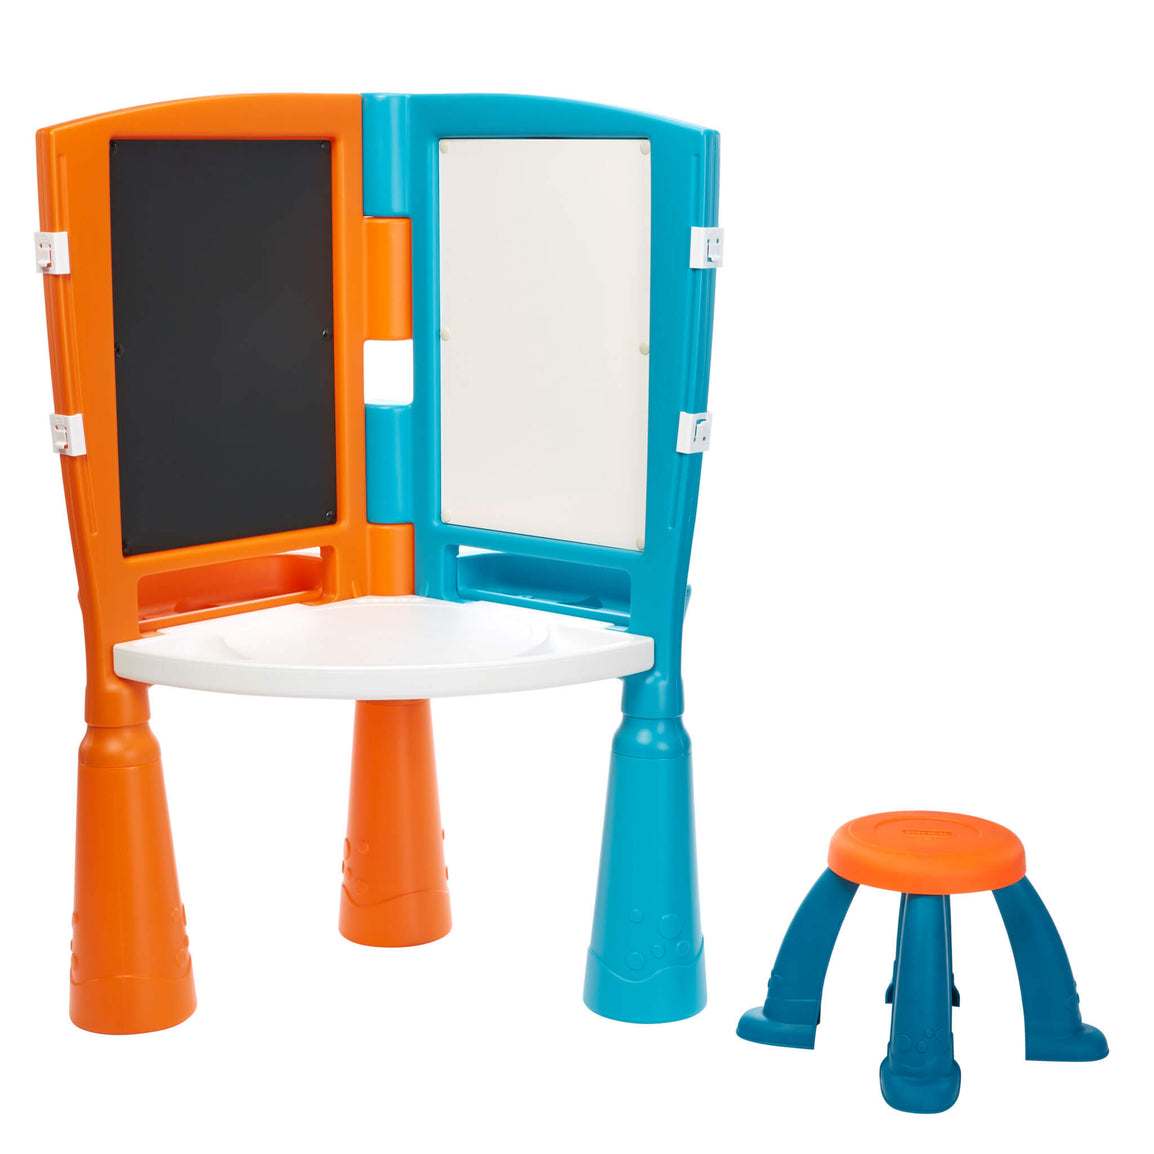 2-in-1 Drawing Table - Official Little Tikes Website